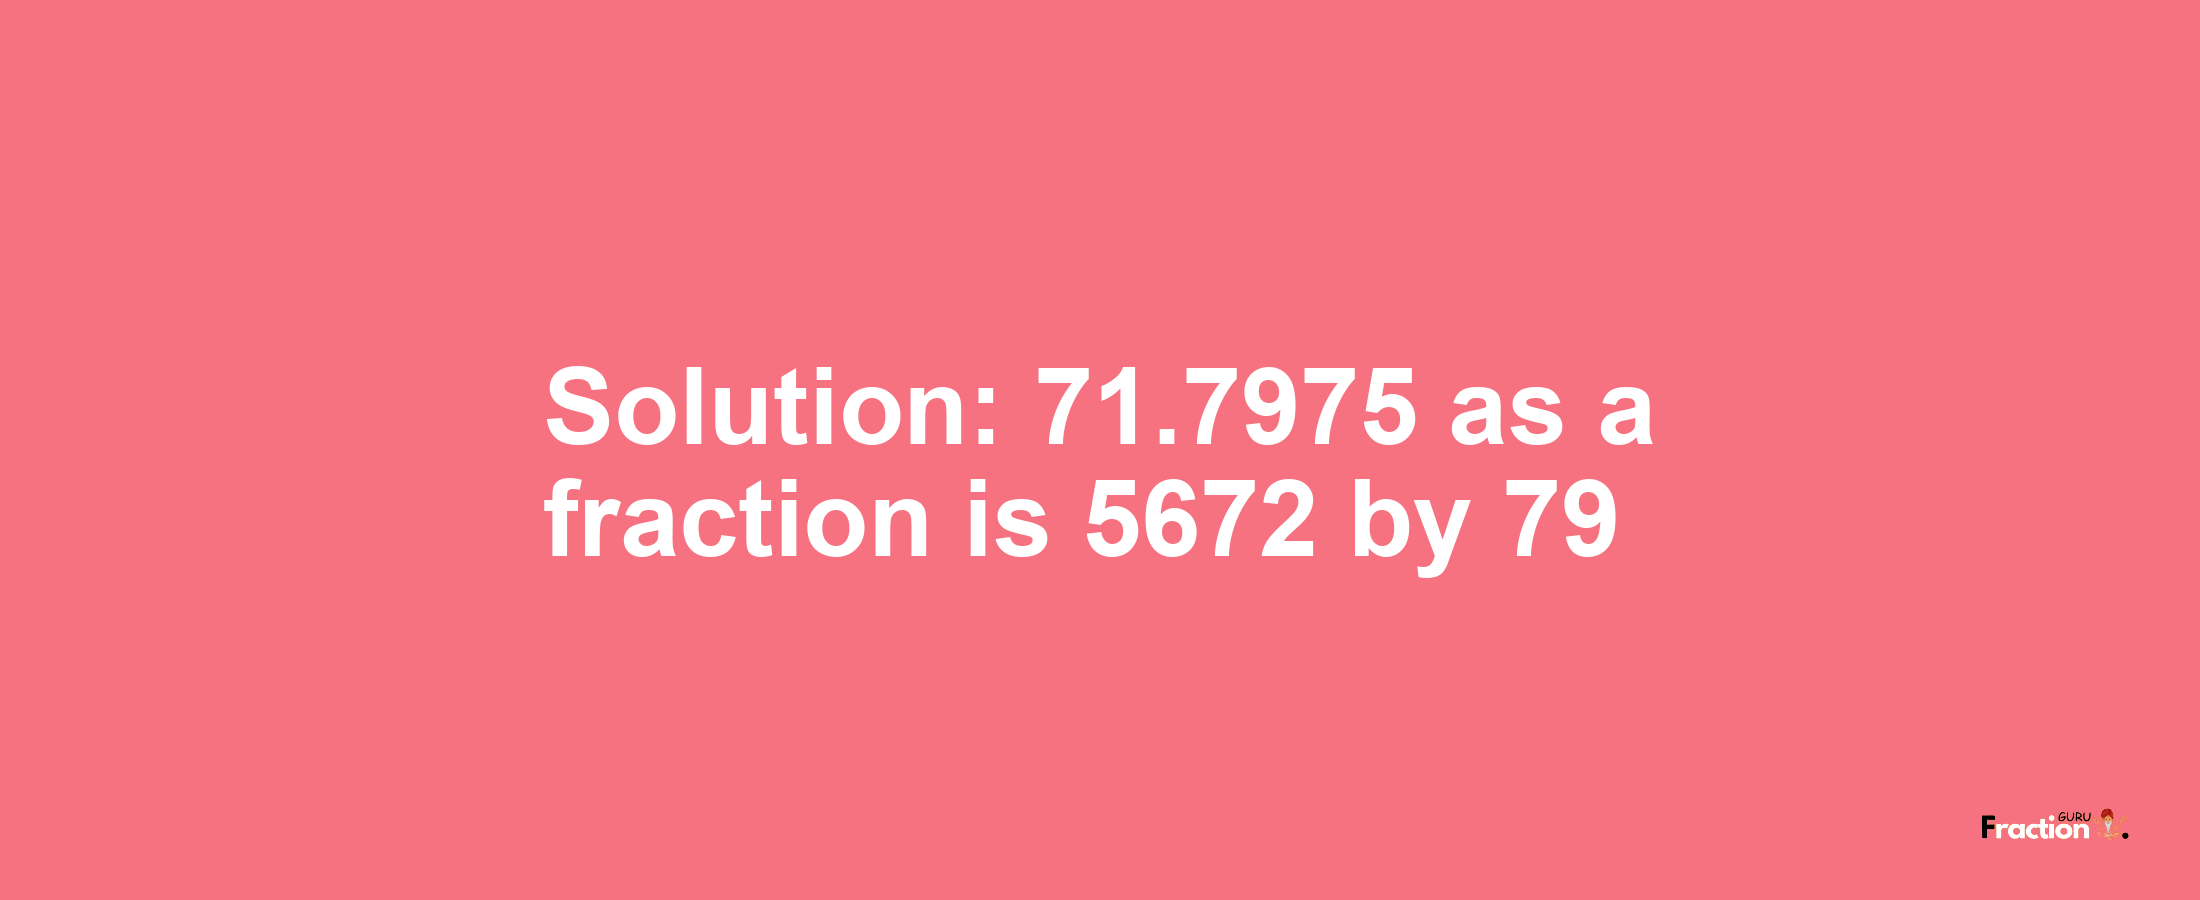 Solution:71.7975 as a fraction is 5672/79